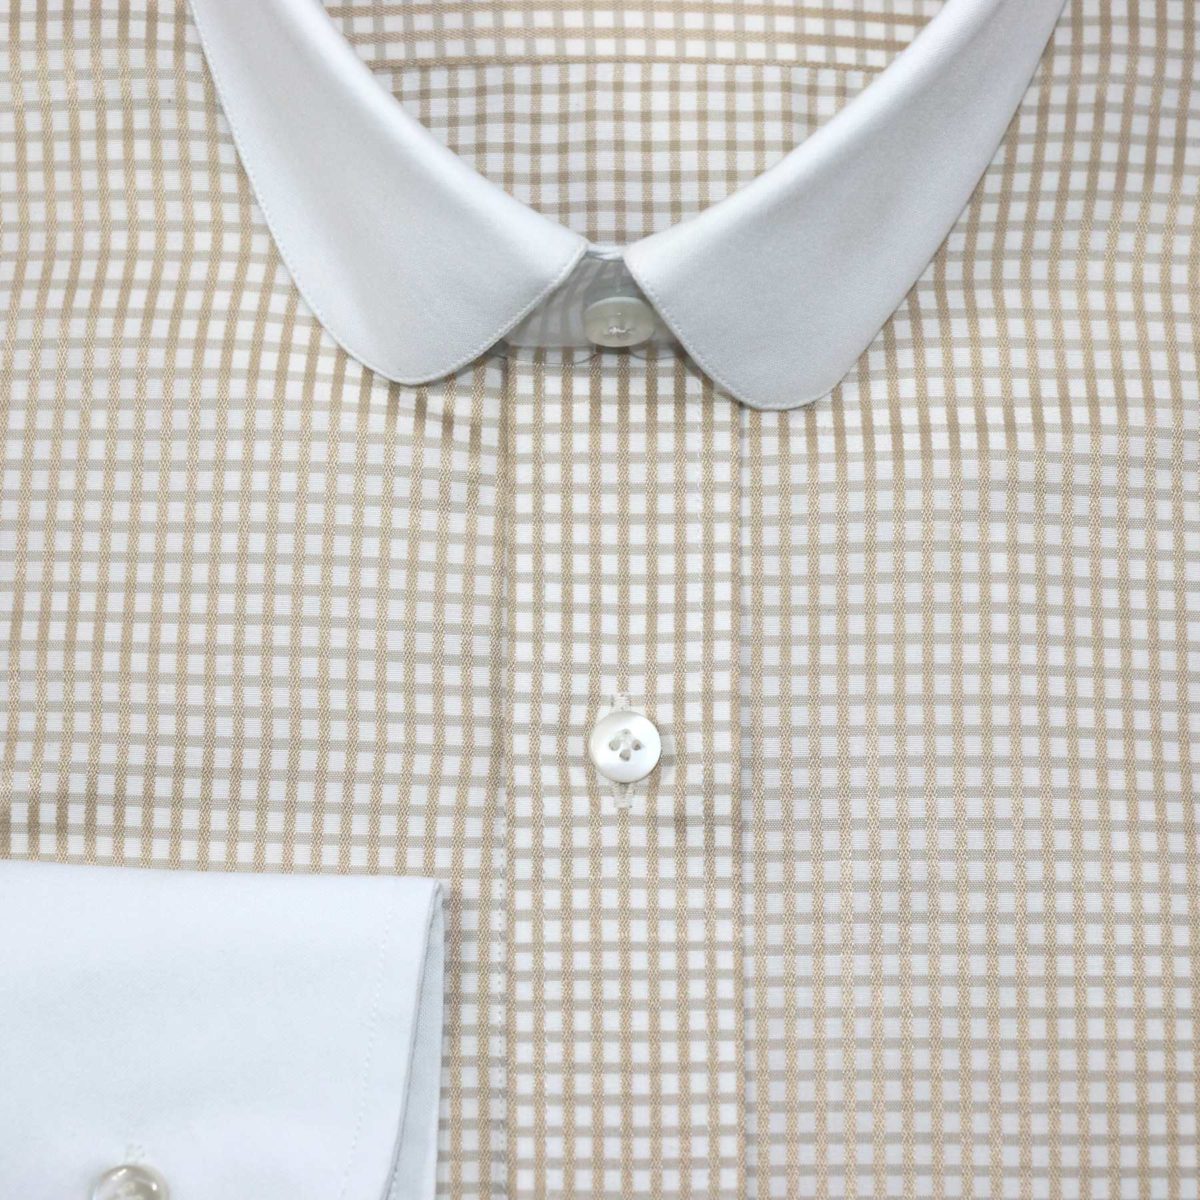 Penny Collar Shirts - Shop Online - Page 2 of 8 - John Clothier London